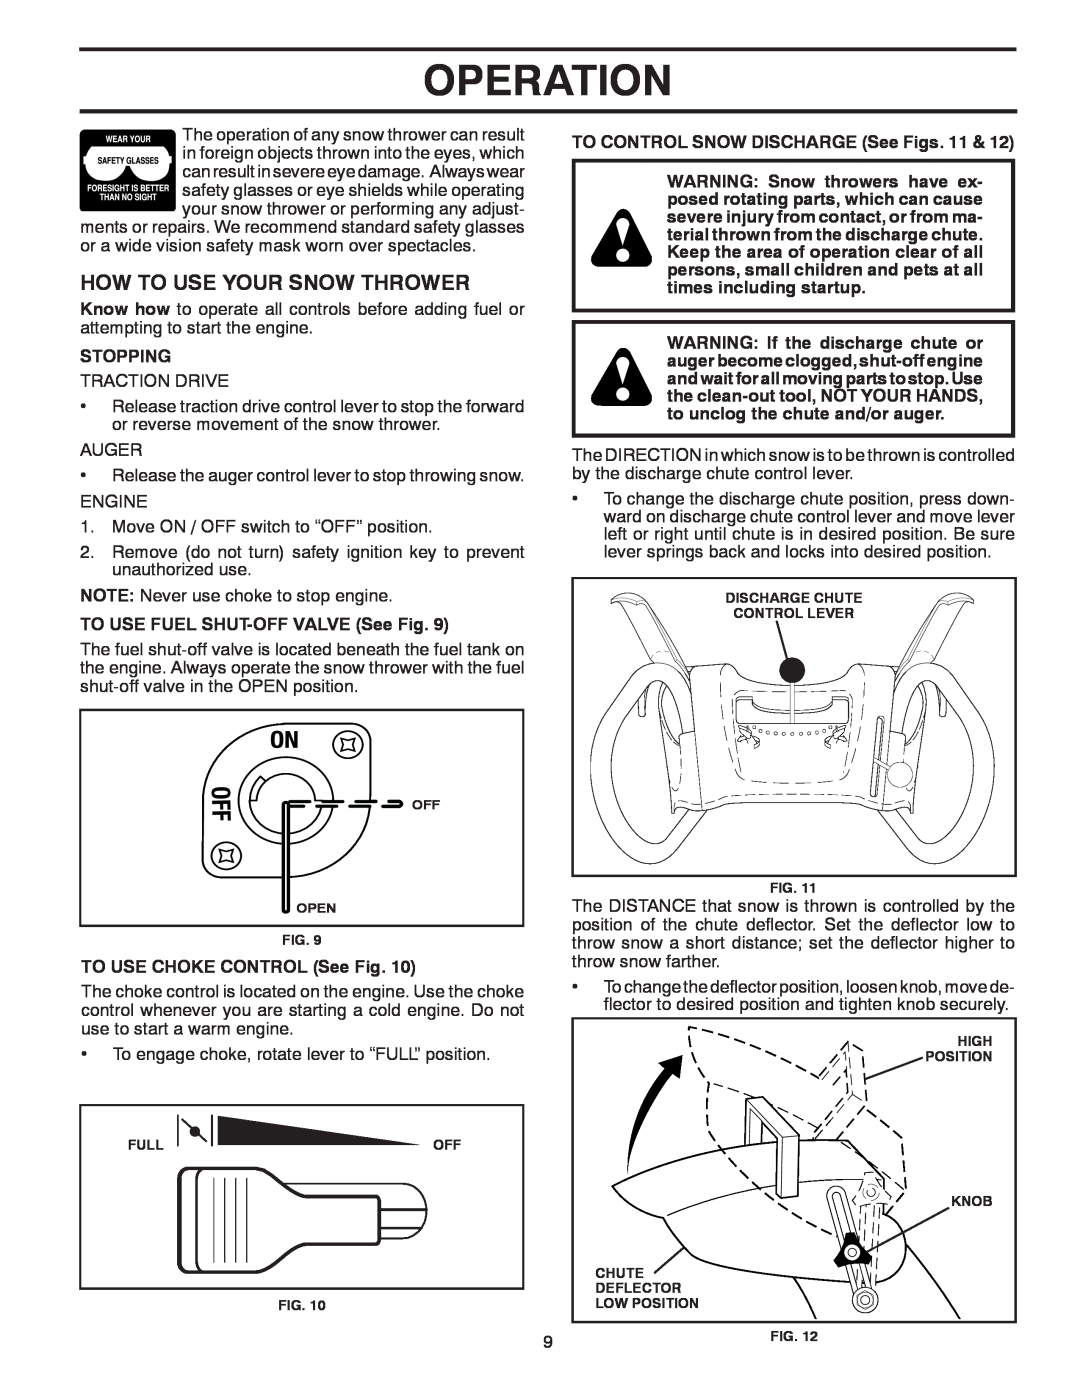 Poulan 421888 owner manual How To Use Your Snow Thrower, Operation, Stopping, TO USE FUEL SHUT-OFF VALVE See Fig 